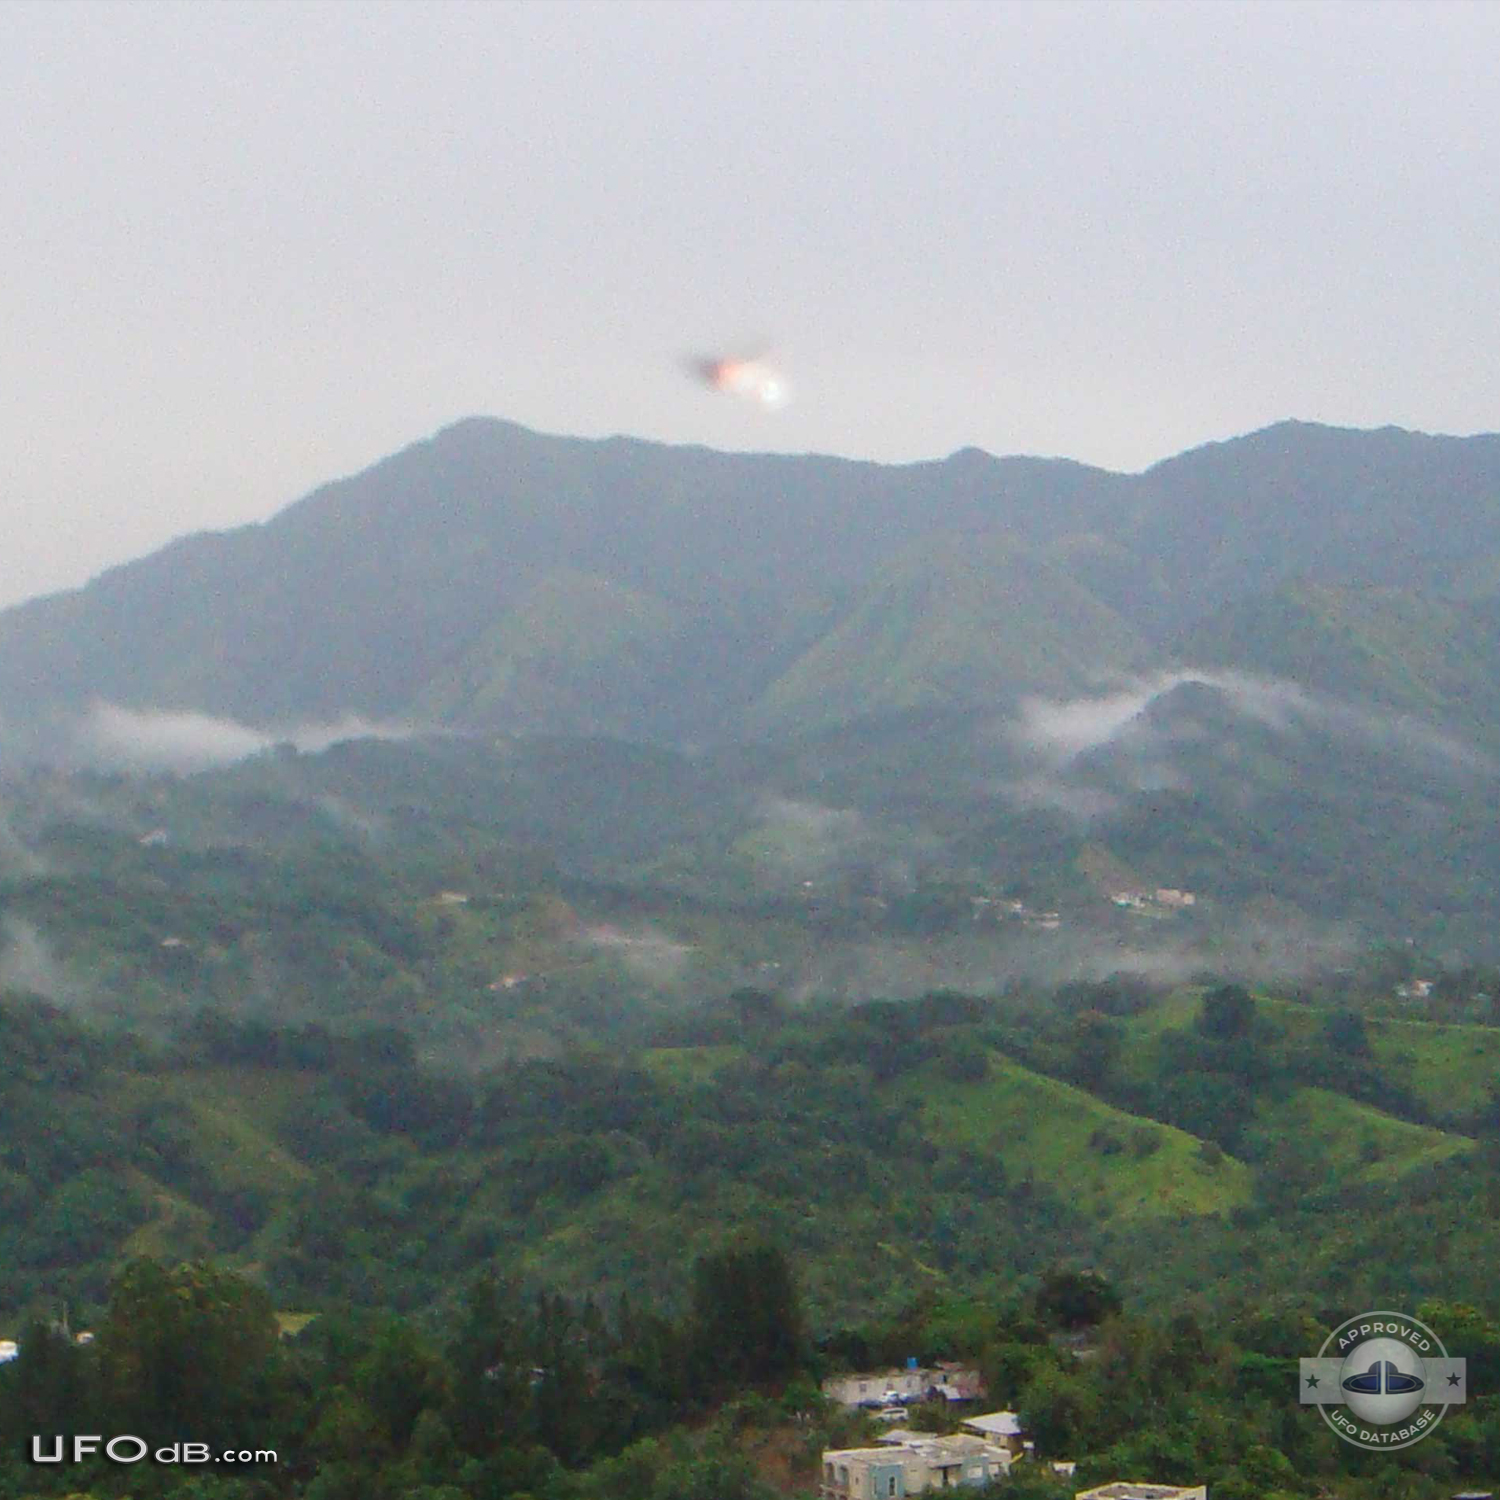 Two ufo pictures taken in the high mountains - Puerto Rico - July 2011 UFO Picture #376-5